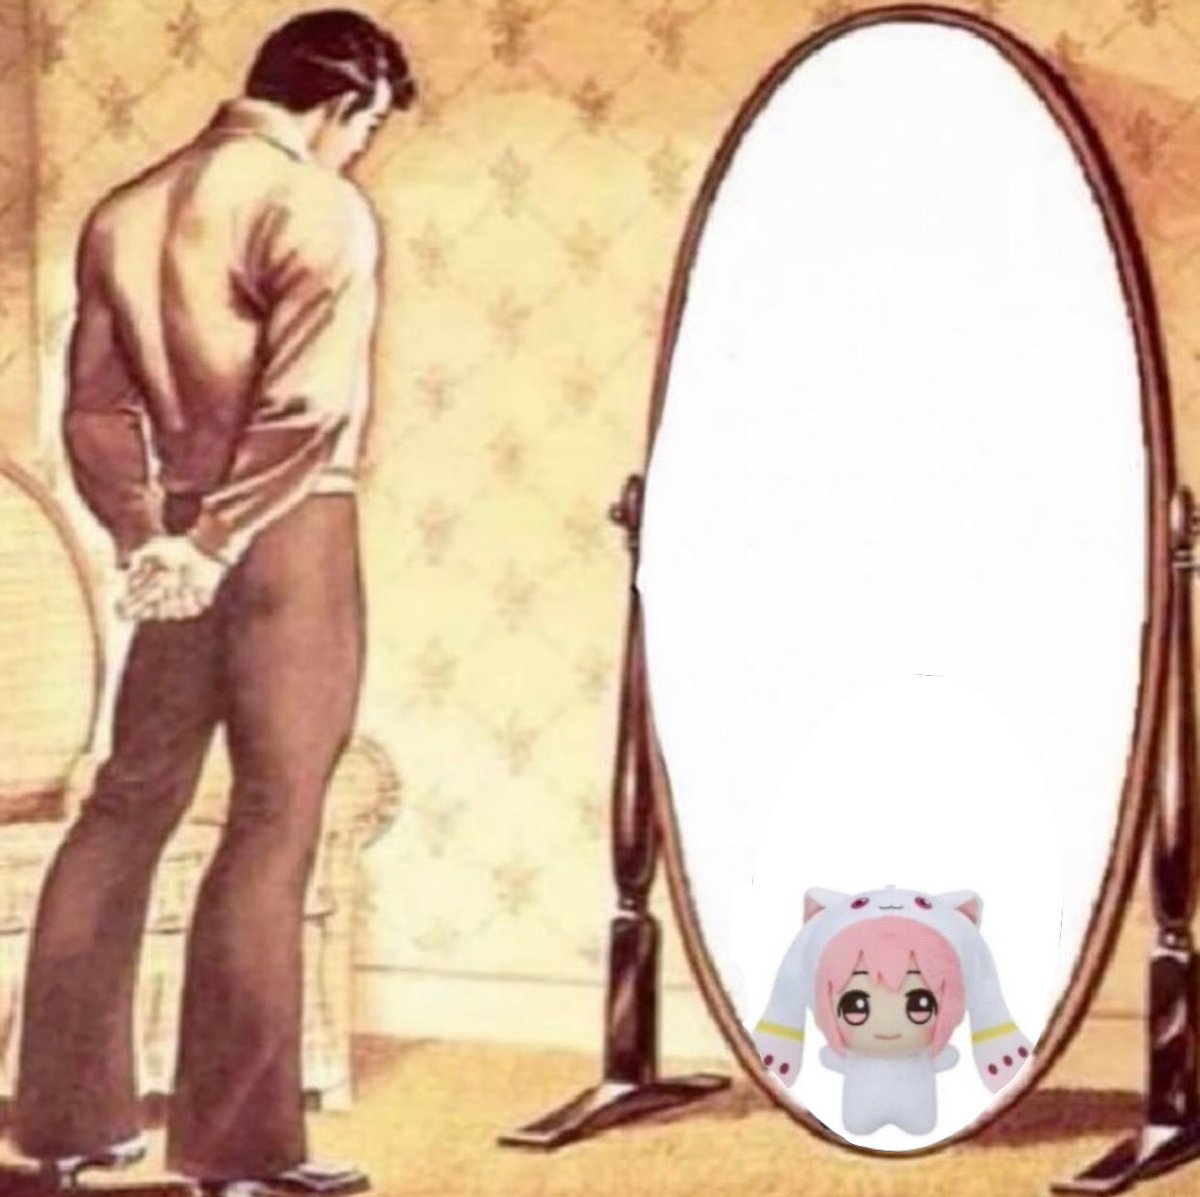 Visualizing in the mirror the man I want to become